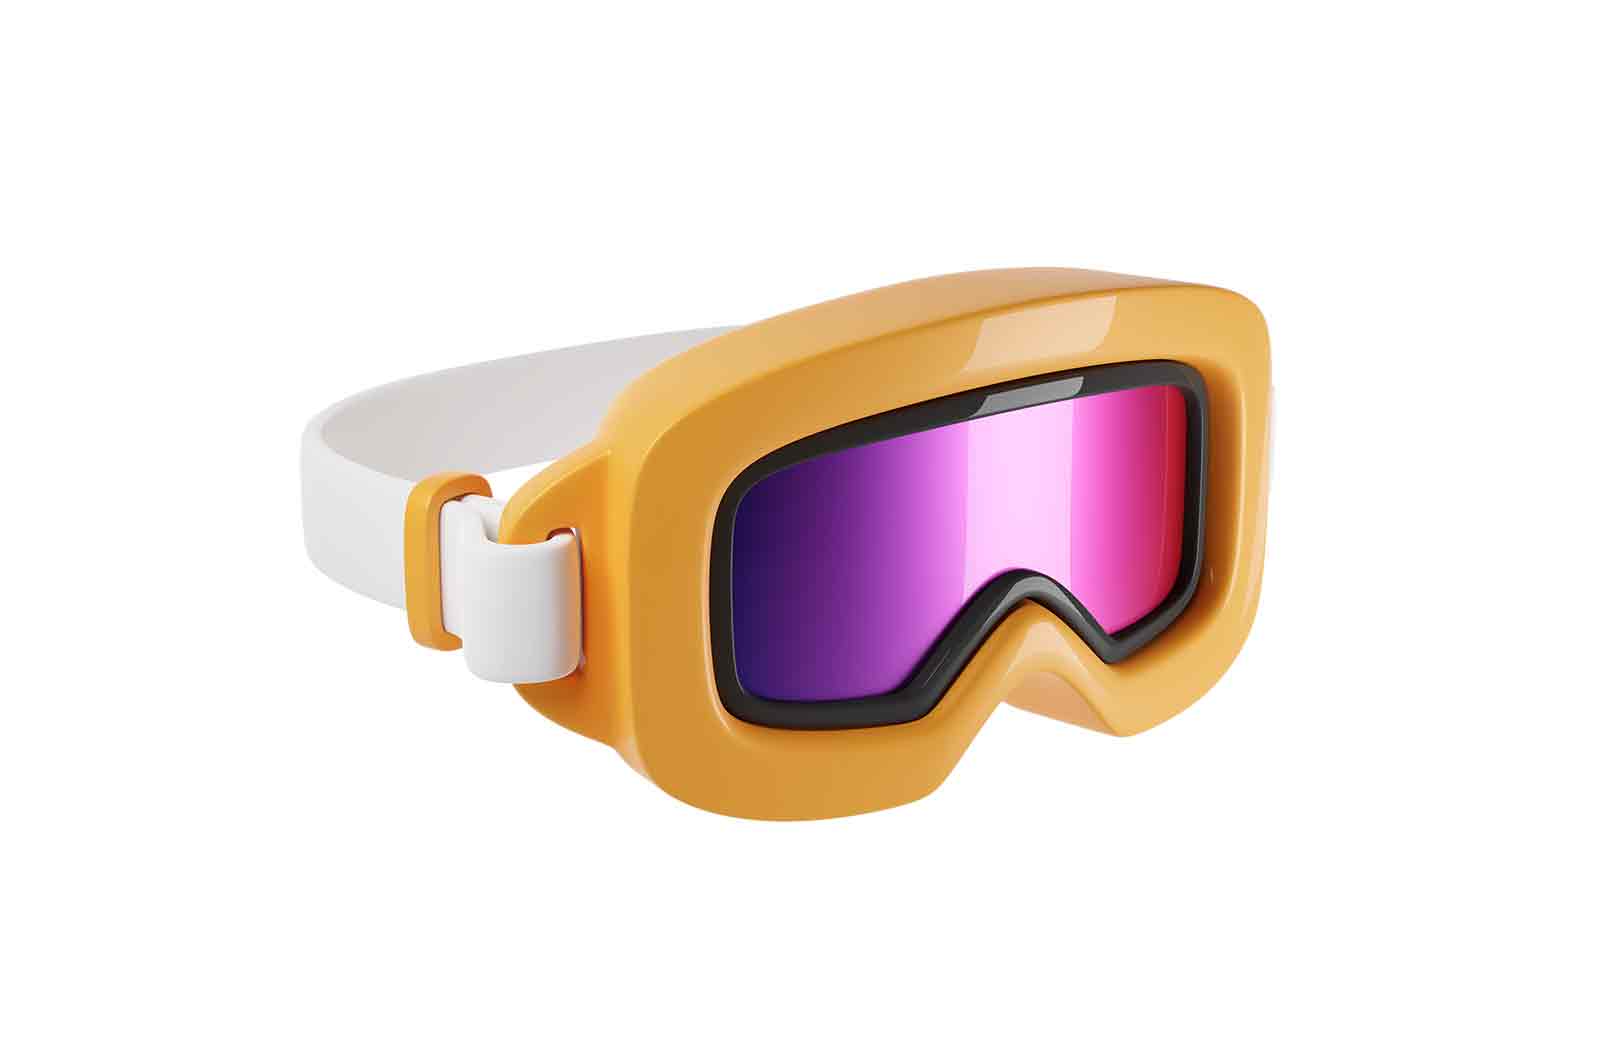 Ski or snowboarding goggles 3d rendered illustration. Ski mask with polarized lens. Equipment for snowboarding and skiing